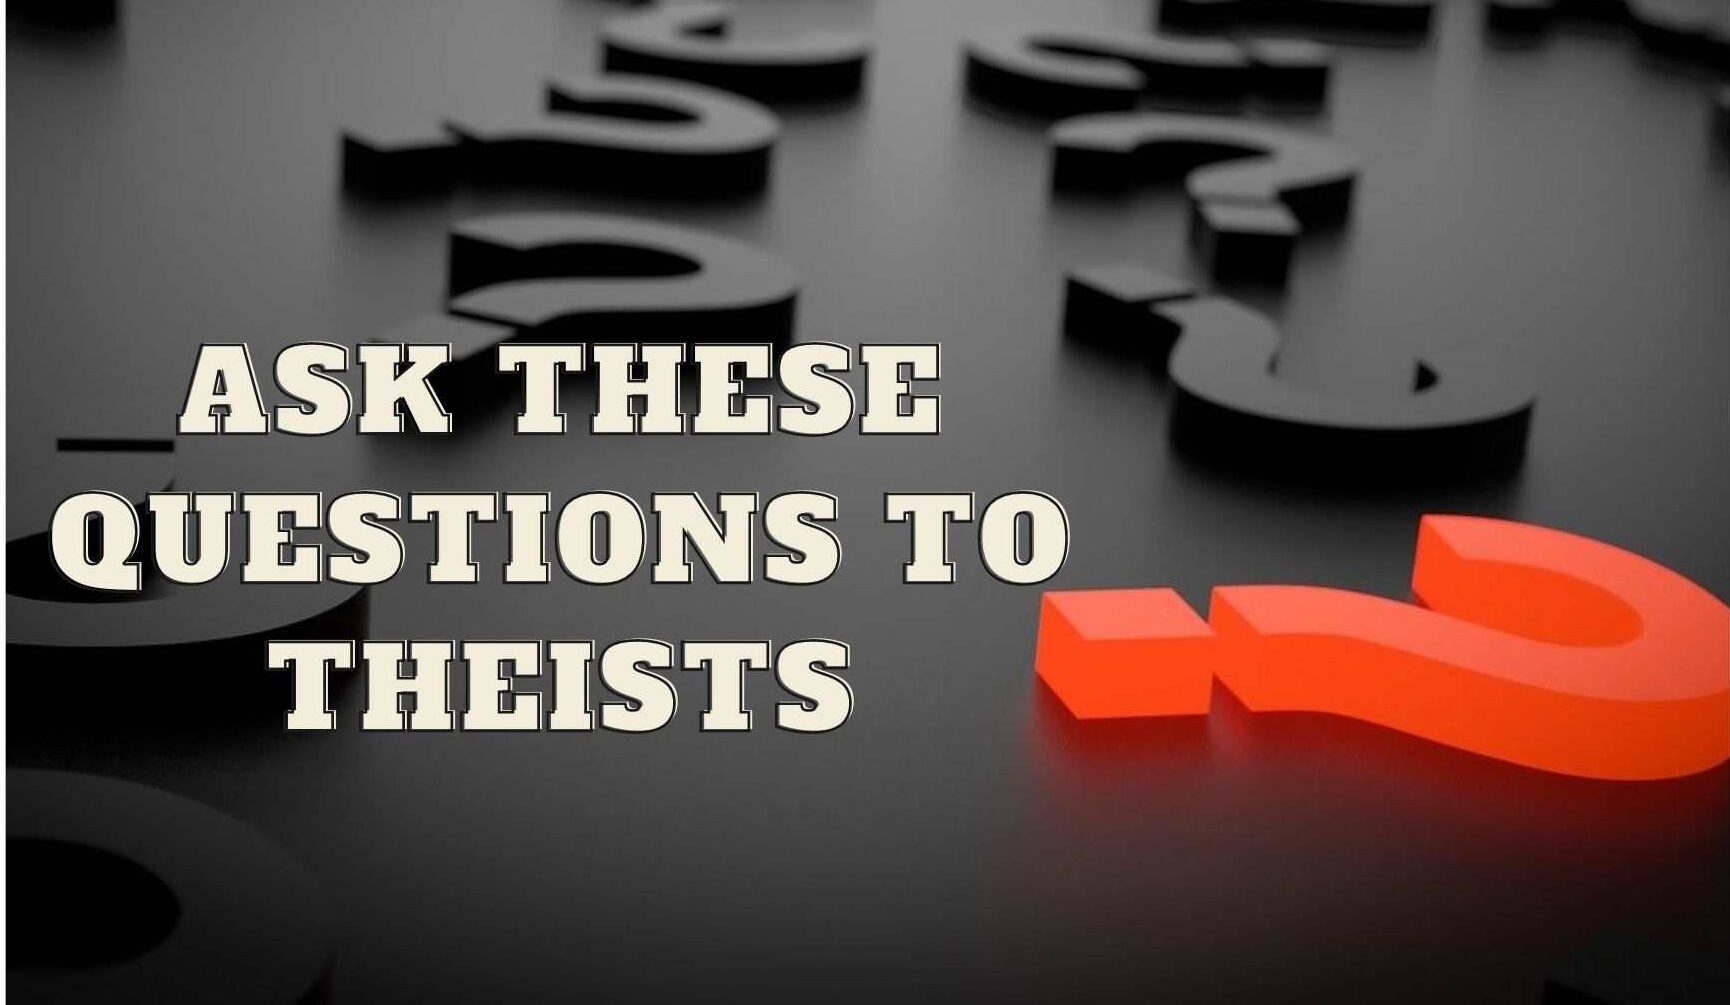 Questions for theists